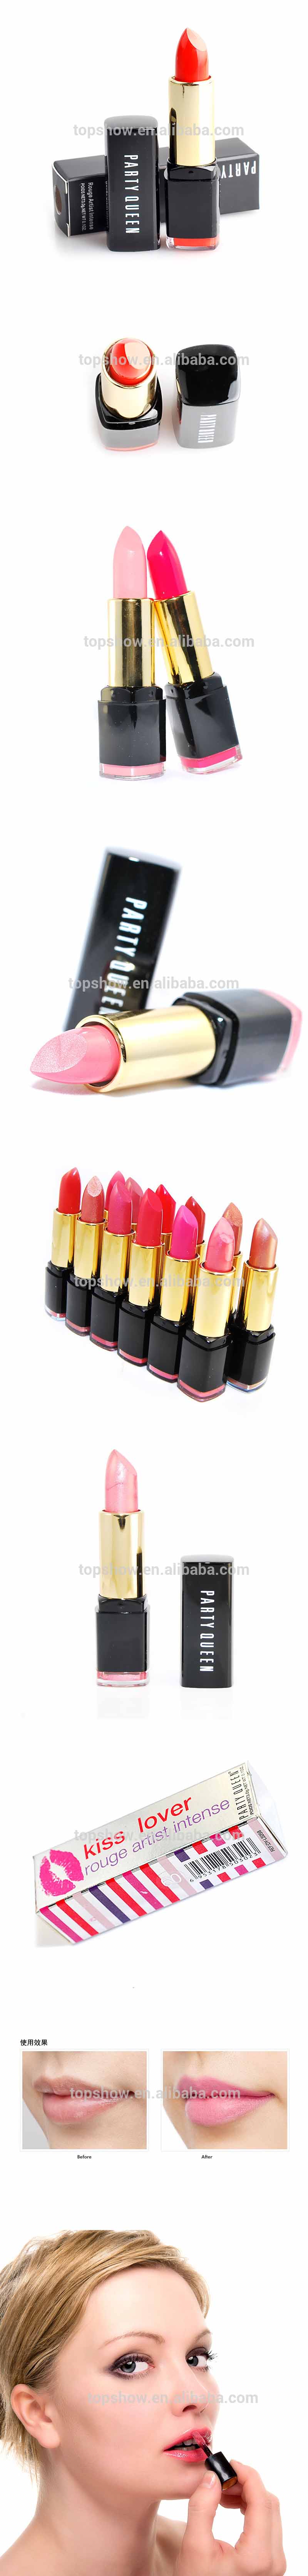 2015 Hot Cosmetic Product Fashion Matte Lipstick with Manufacturers Price